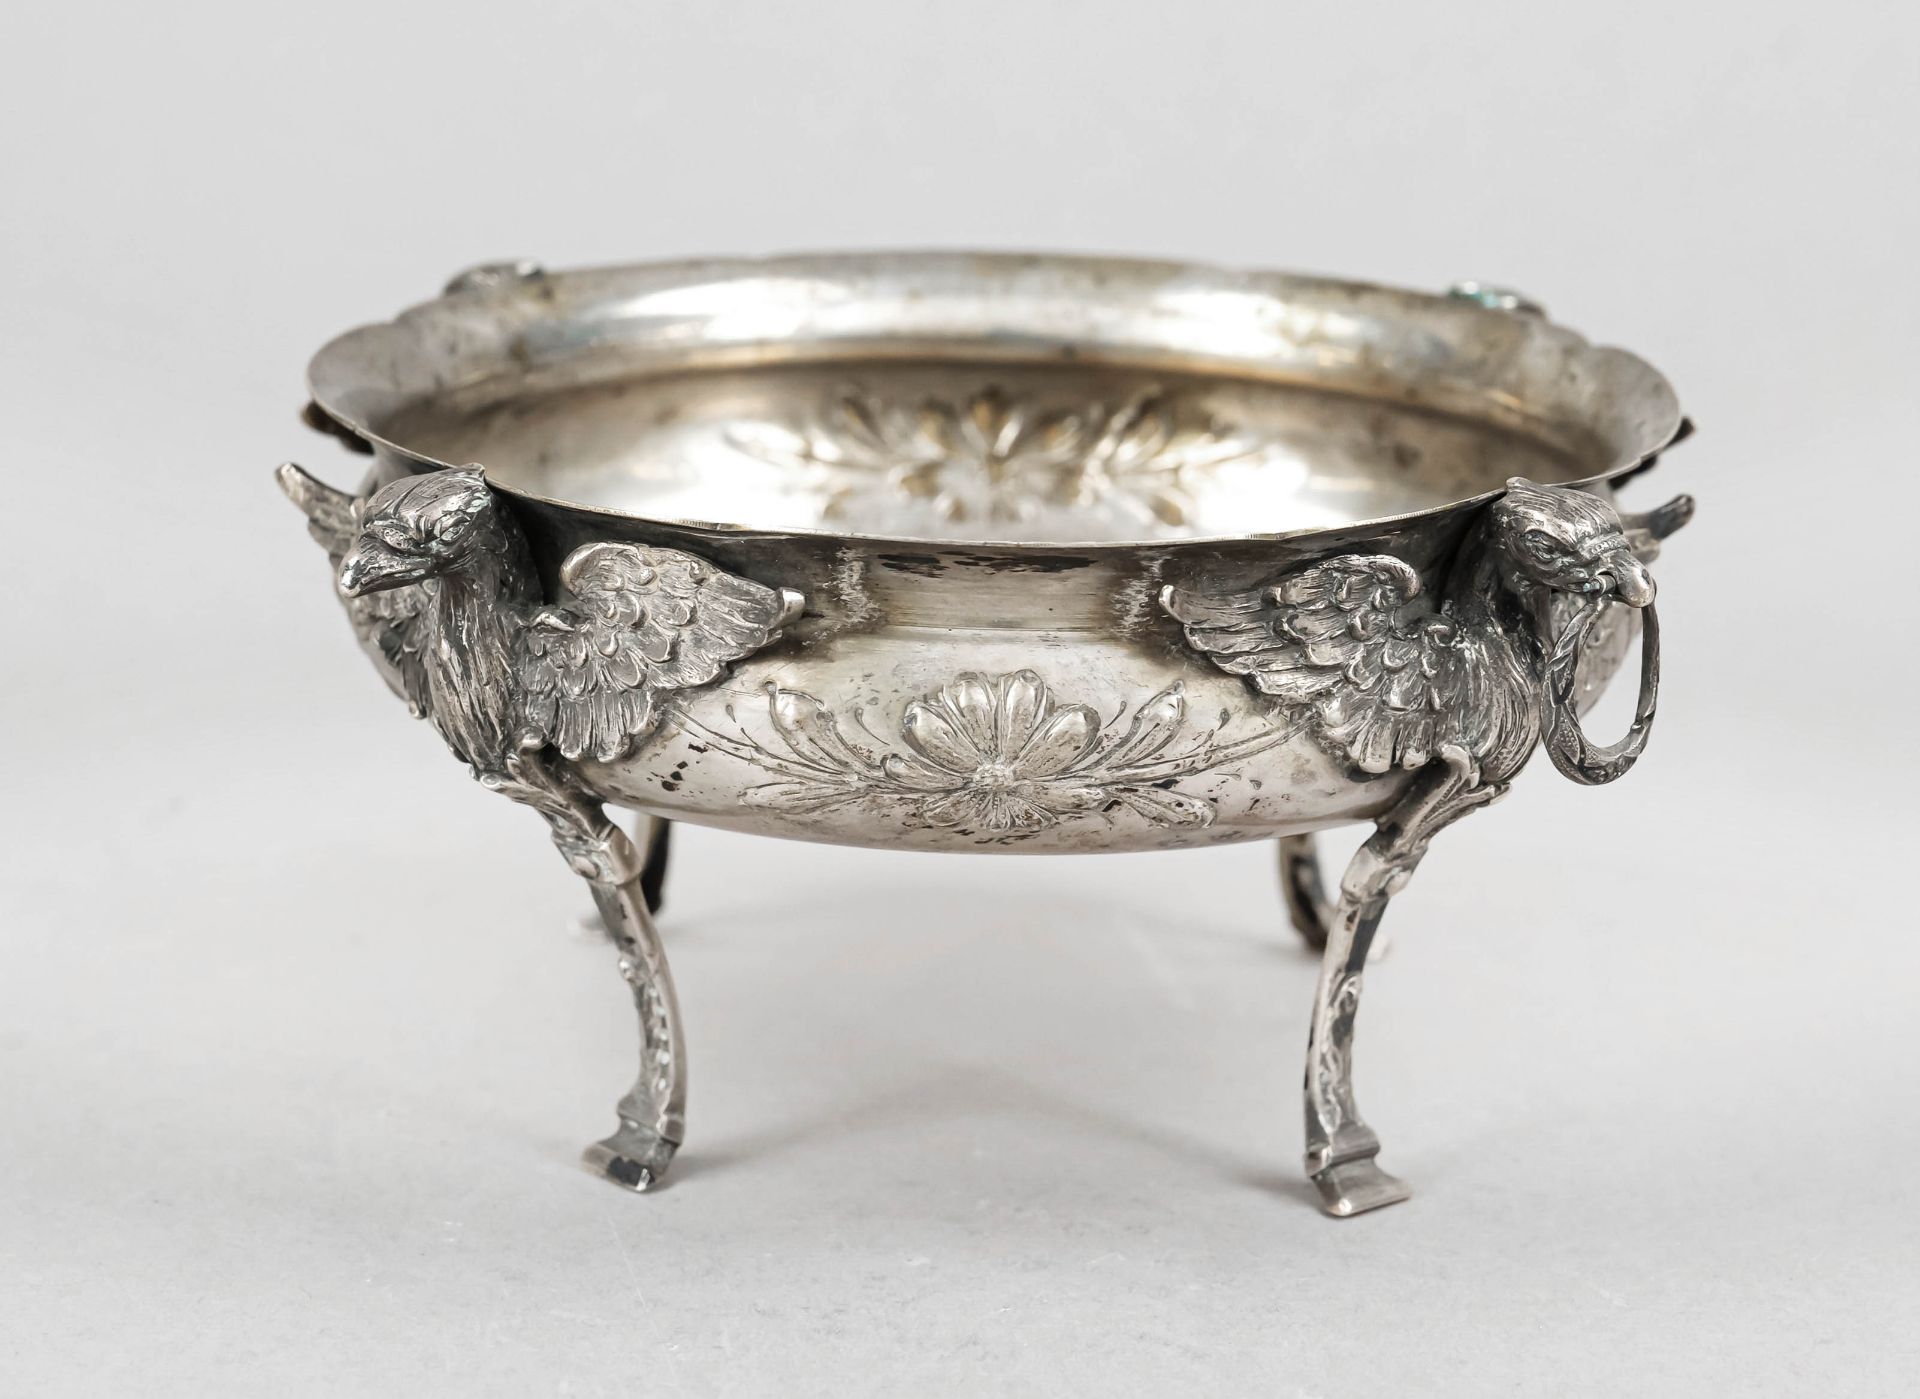 Round centerpiece, German, c. 1900, silver 830/000, on 4 feet with bird attachments (1 ring handle